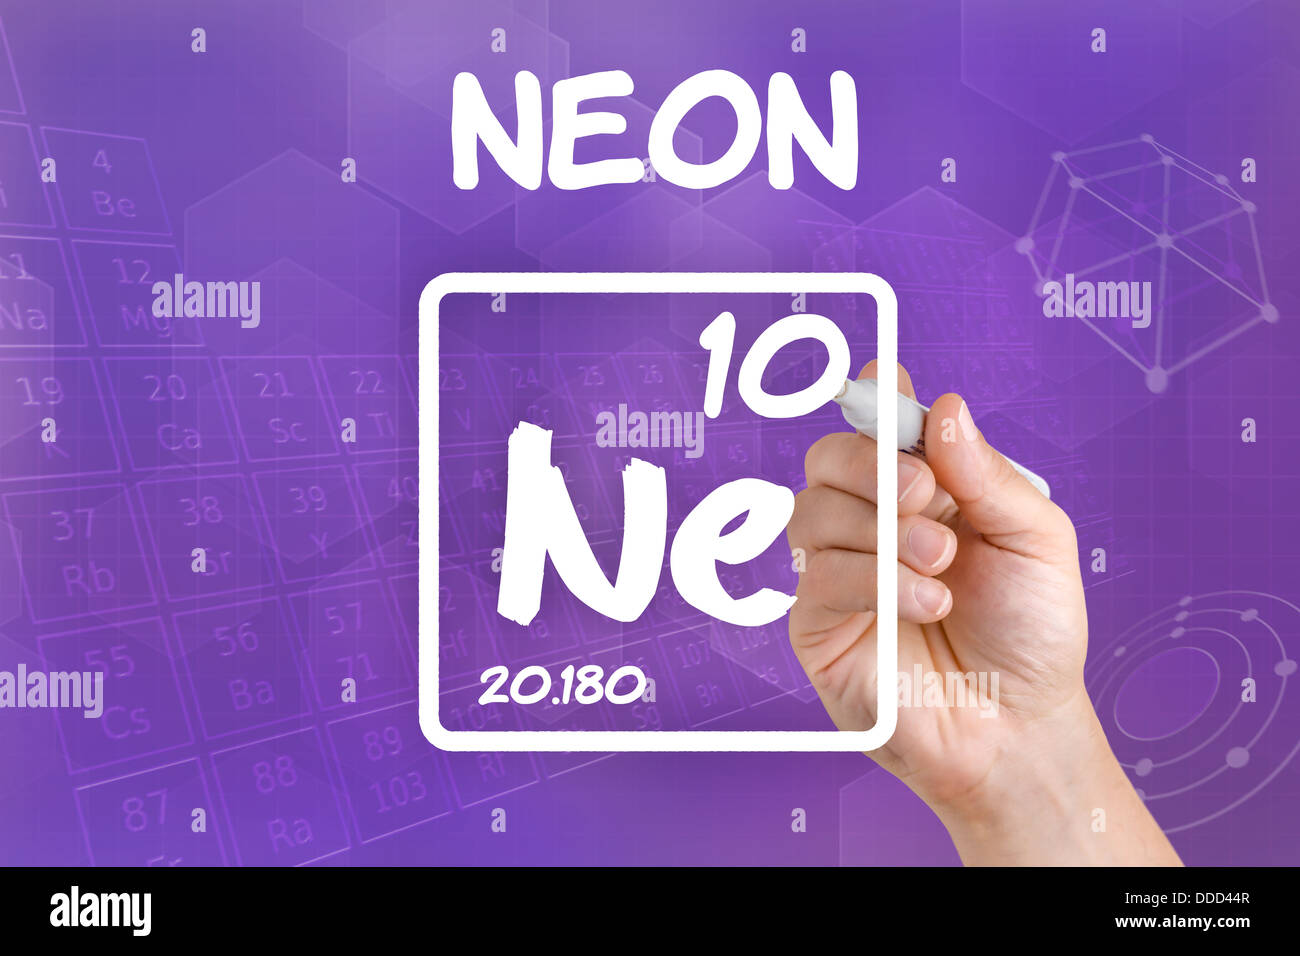 Symbol for the chemical element neon Stock Photo